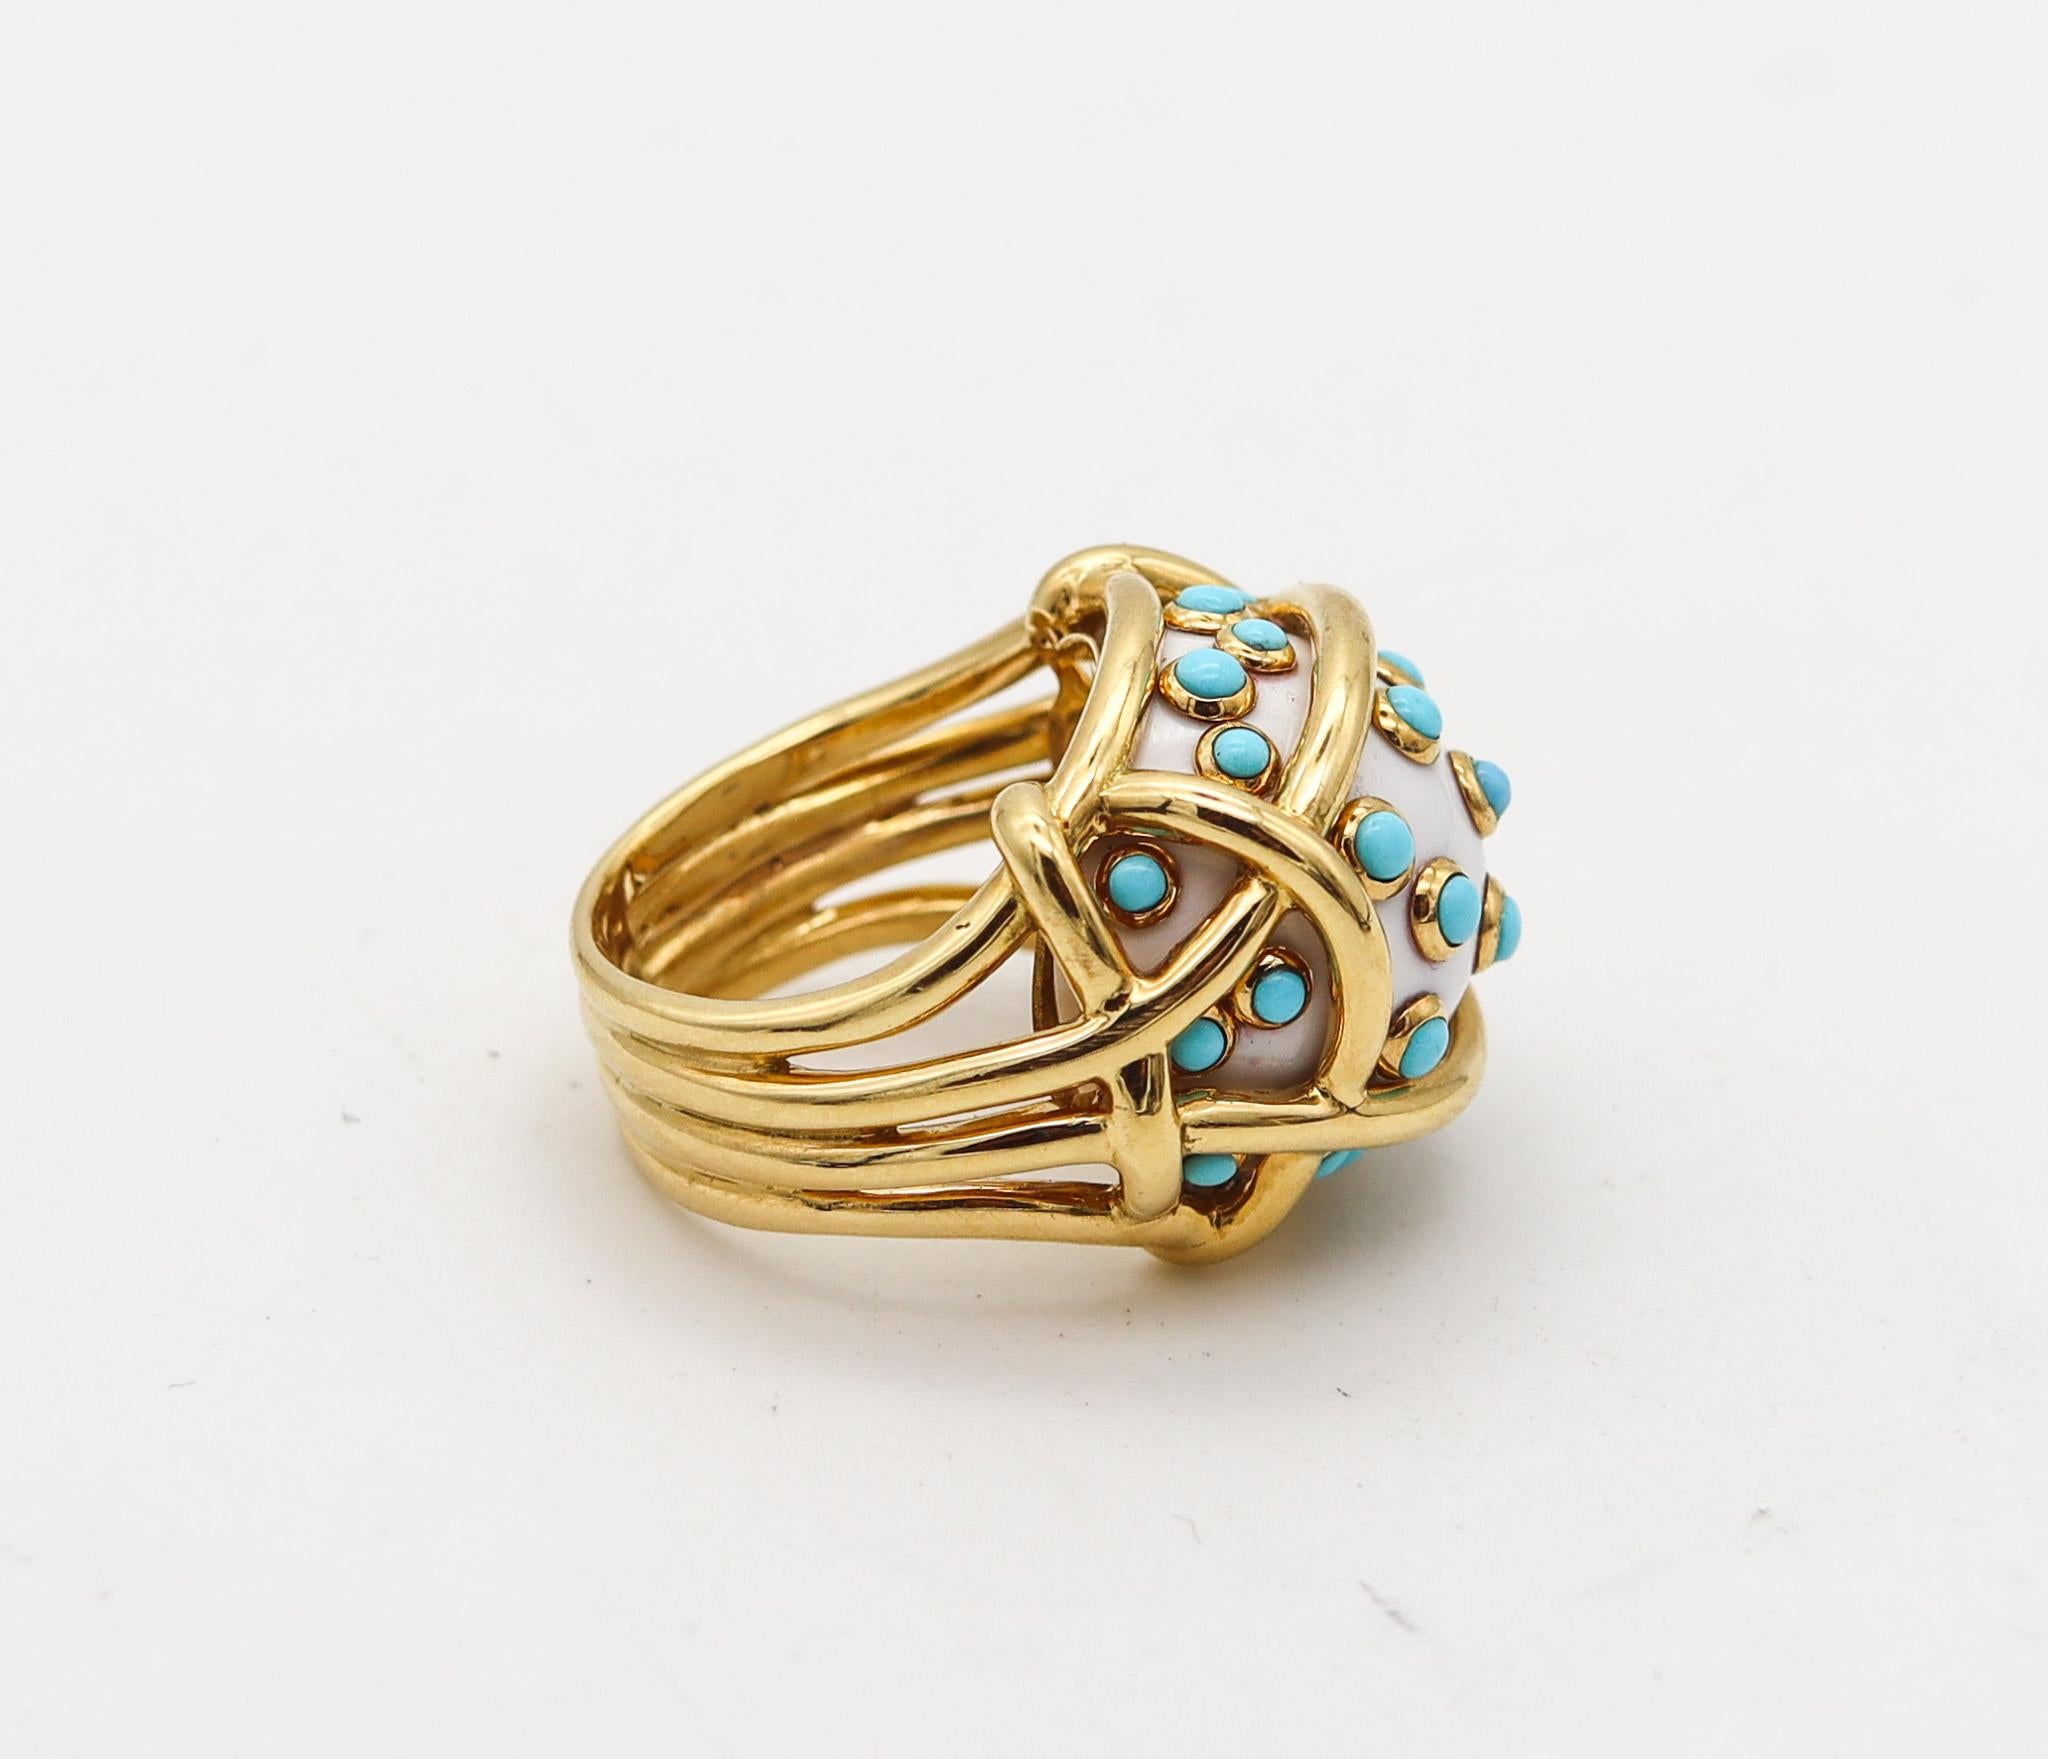 Modernist Verdura Milan Polka Dots Ring In 18Kt Gold With 19.85 Ctw In Turquoise And Coral For Sale